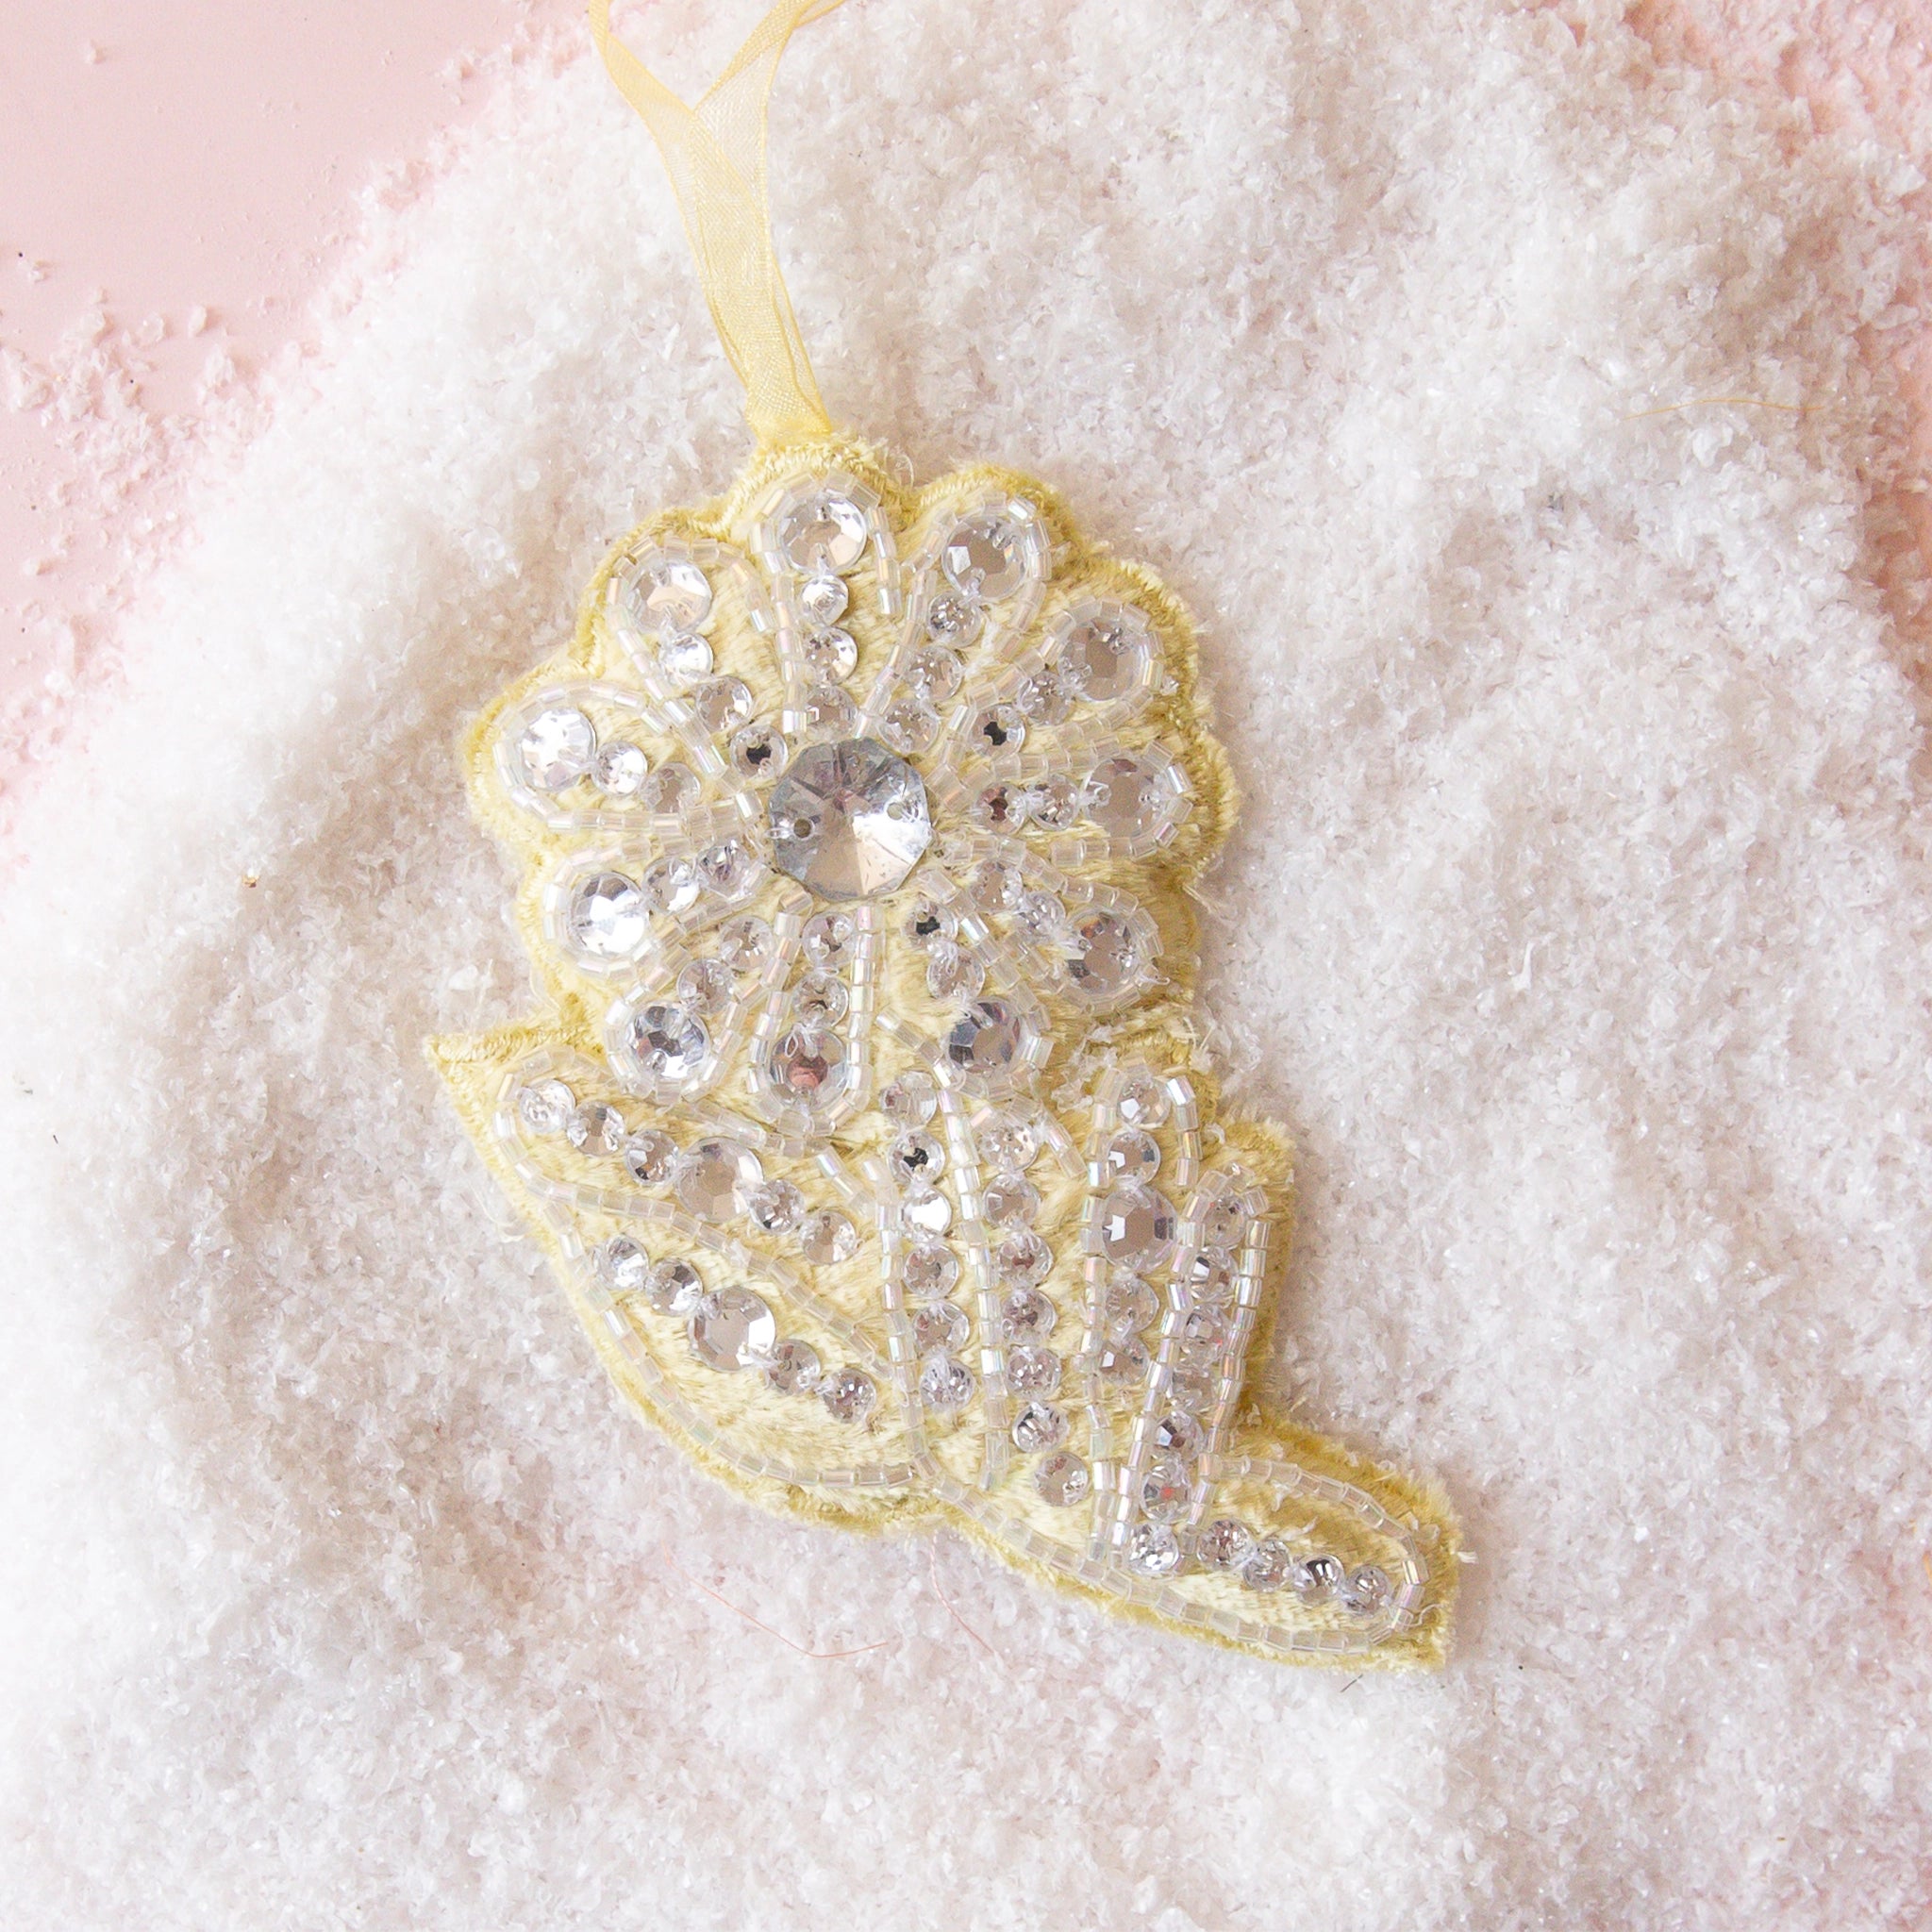 On a pink snowy background is a yellow flower shaped ornament with rhinestones. 